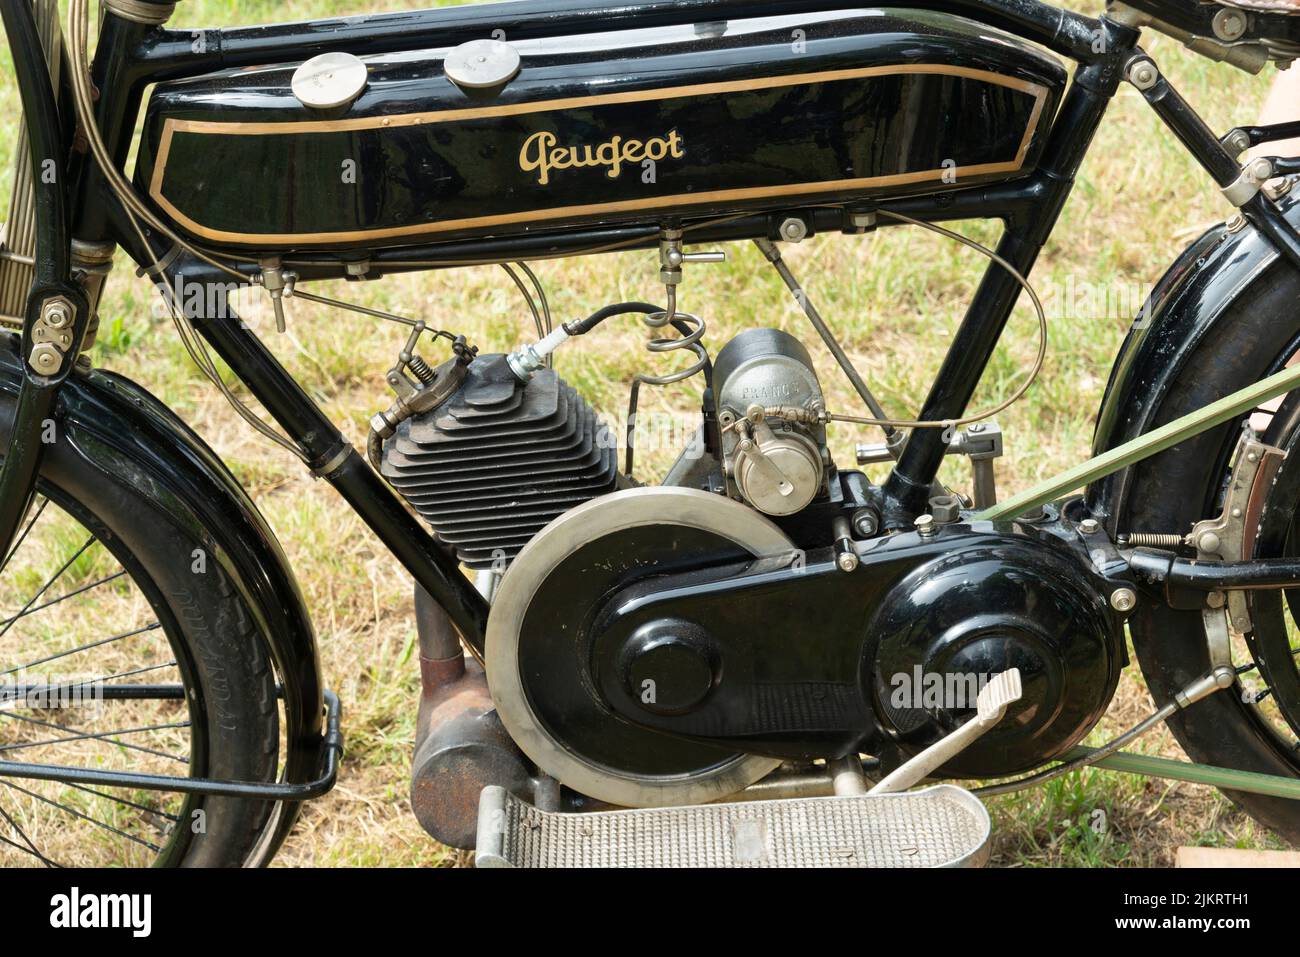 1921 Peugeot 2 3/4 HP 300 cc. Franch Motorcycle, Engine Stock Photo